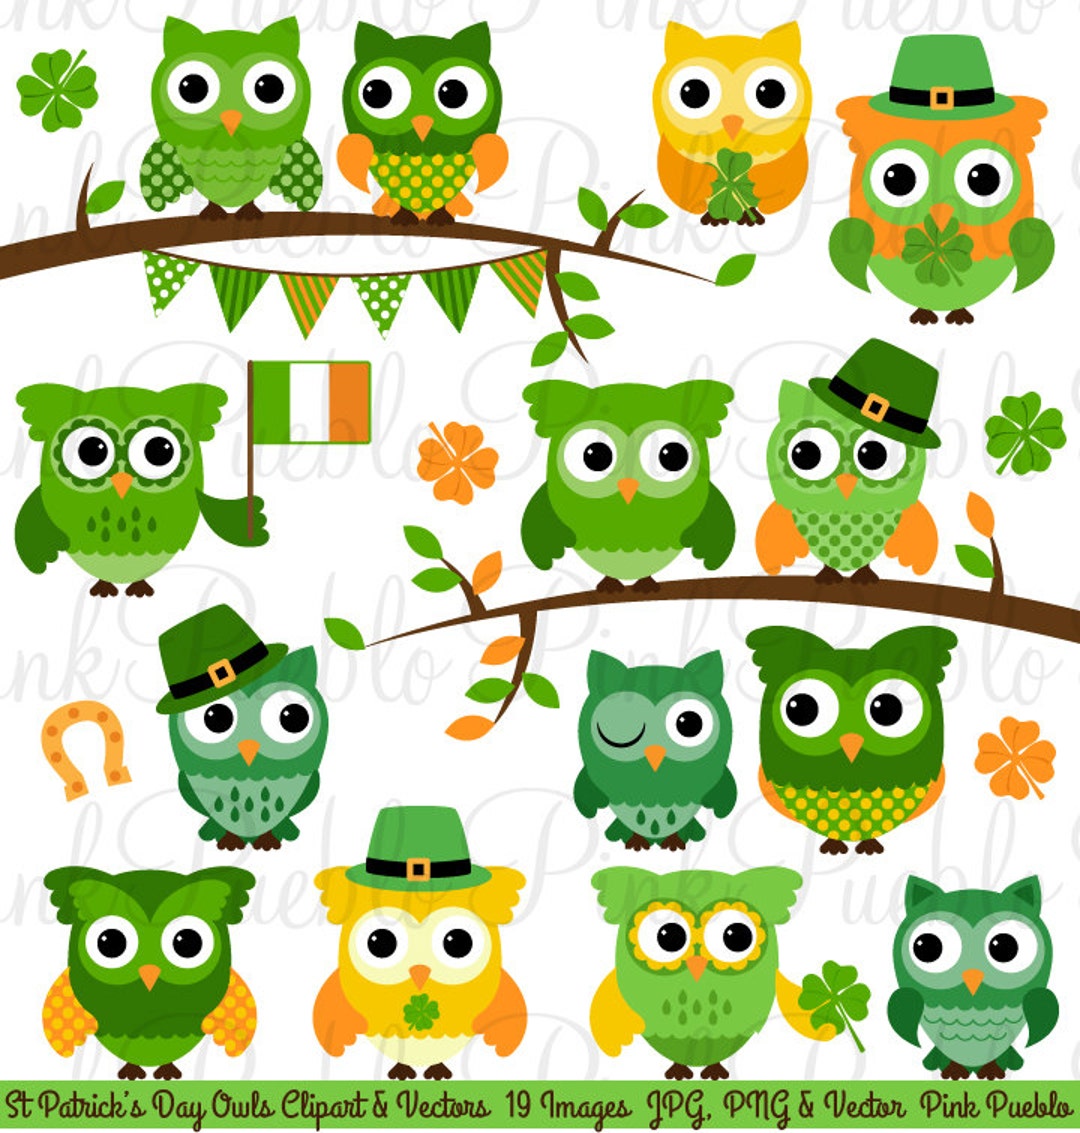 St Patrick's Day Hat Background Vector Art & Graphics